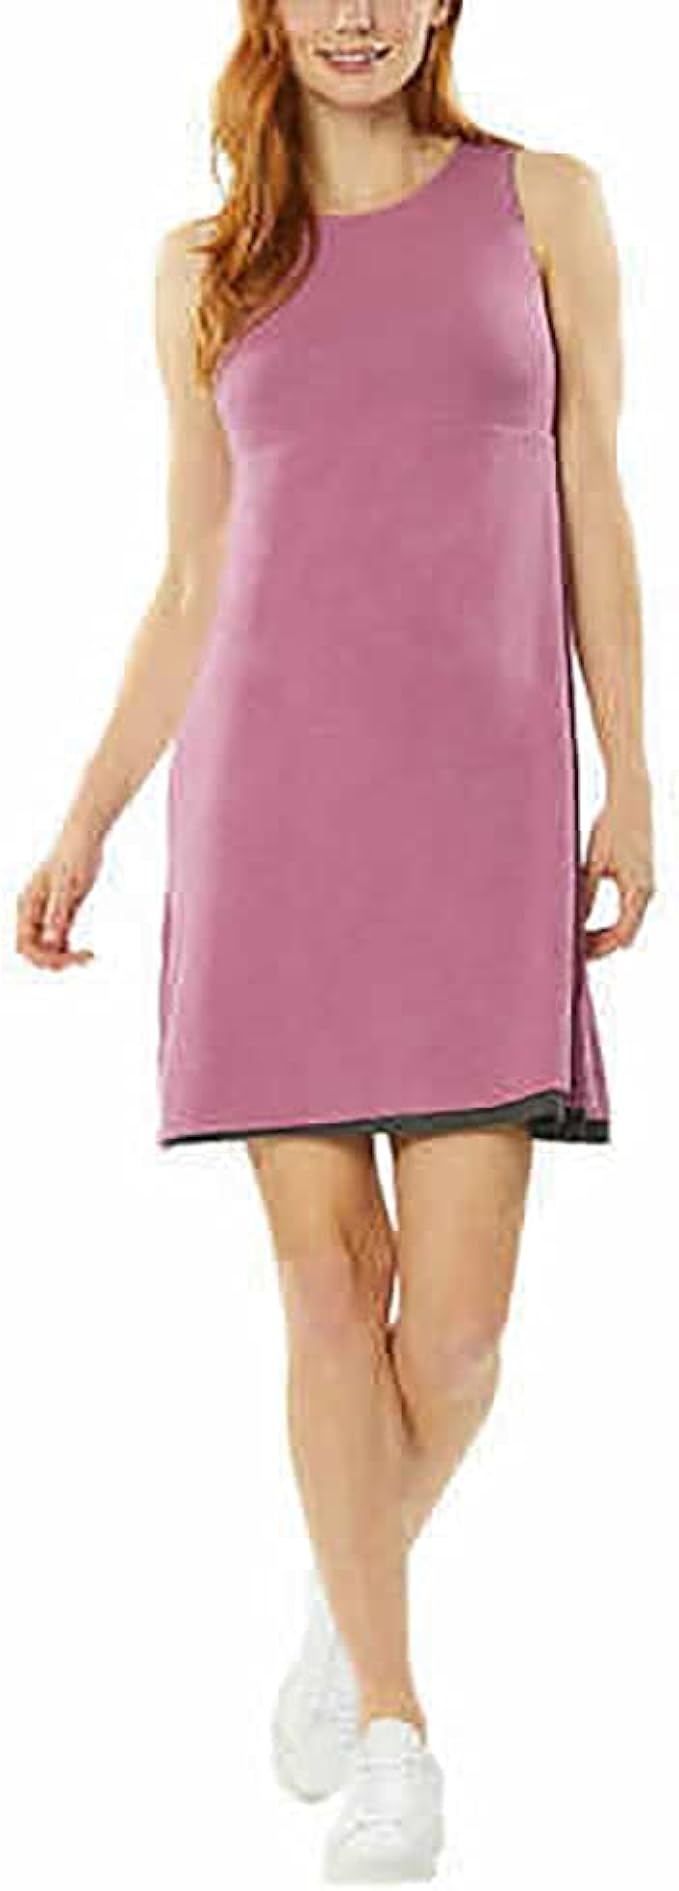 32 DEGREES Women's Reversible Dress (HT.Pink & HT.Charcoal, Small)